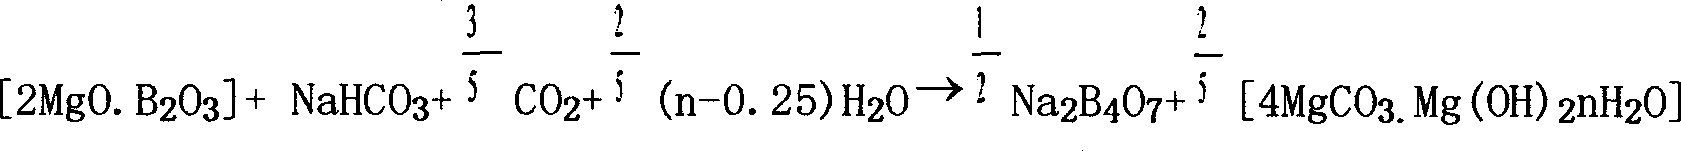 Technology of carbon alkali method for producing borax by adding activator